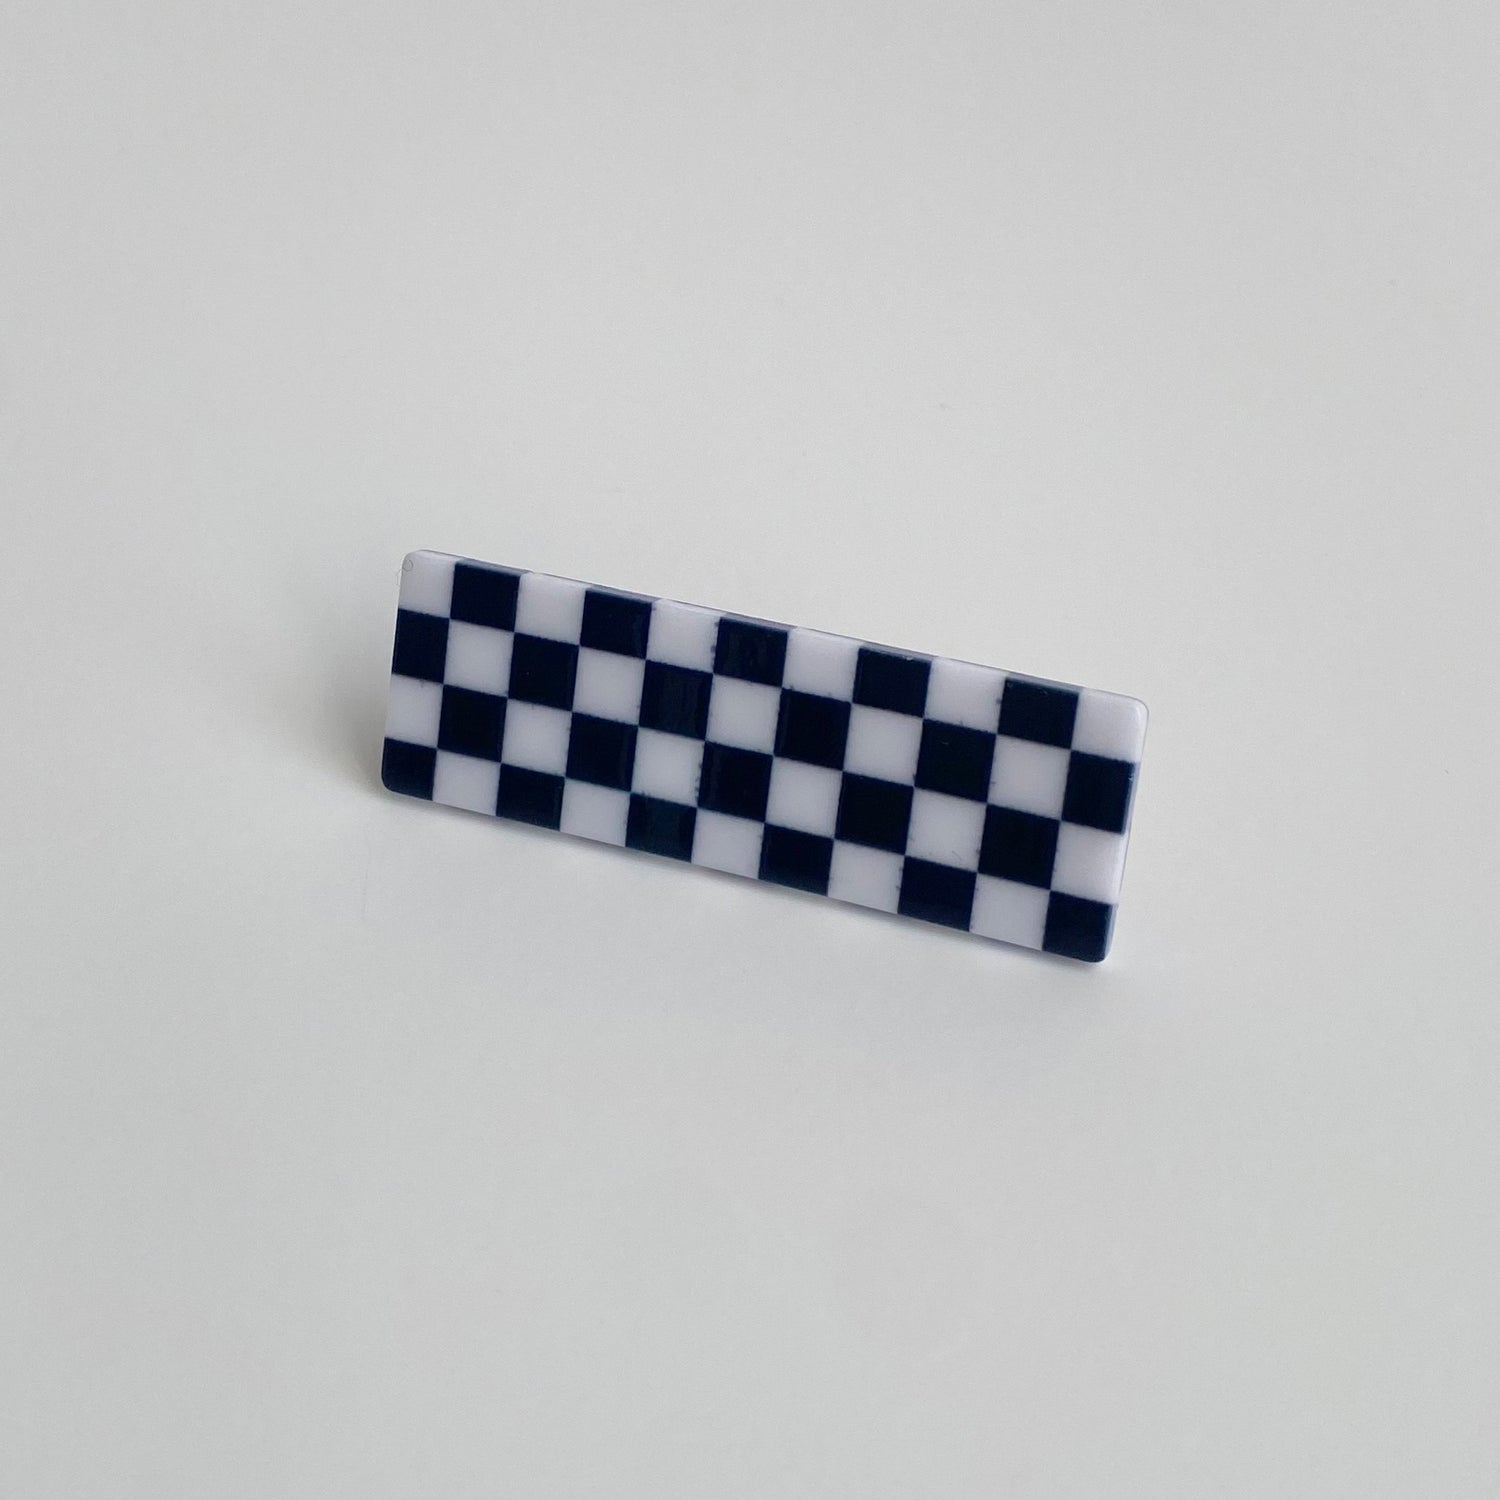 Checkered rectangle hairpin in black checkered